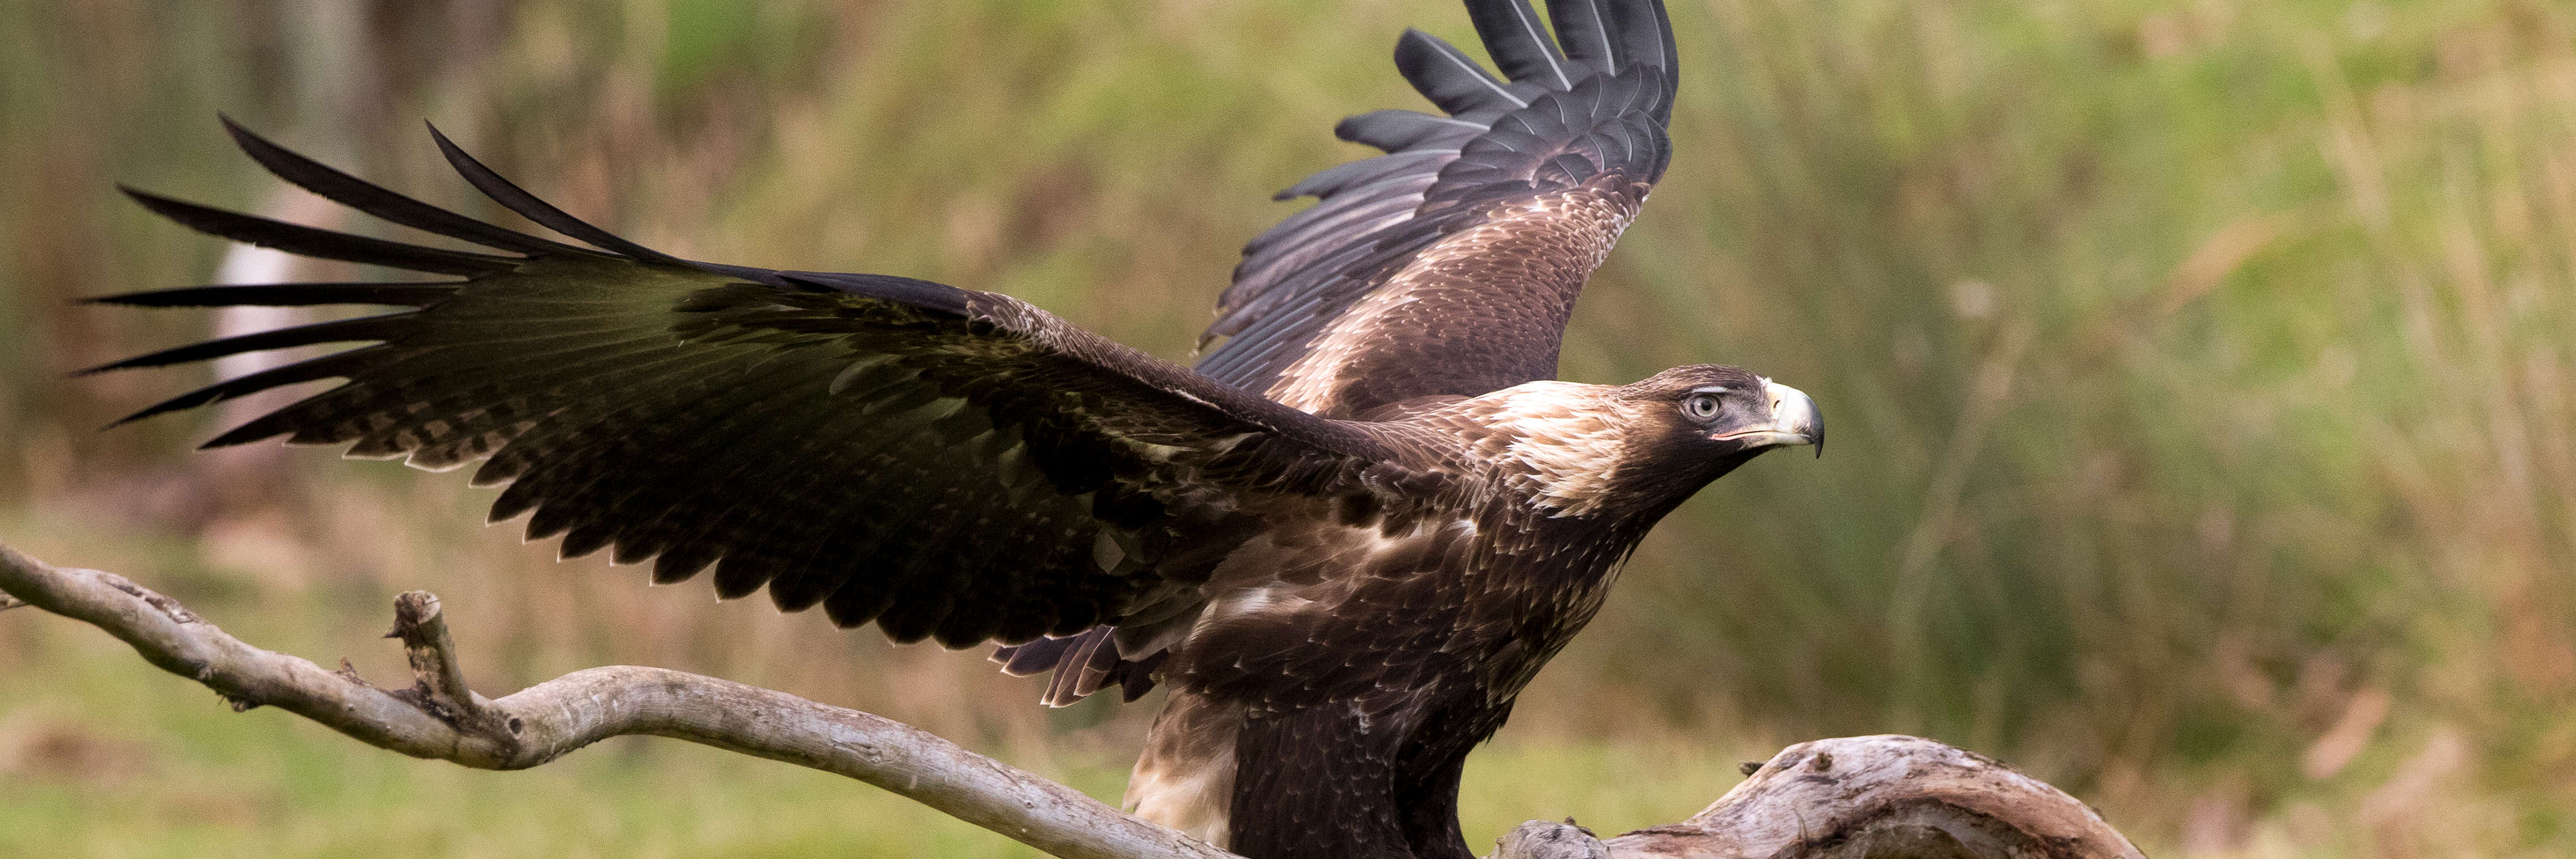 Close-up of a wedge-tailed eagle alighting on a dead branch. In the background, out of focus, are grass, reeds and a little forest.Its wings are still outstretched. The pale feathers on the nape of its neck indicate that it is a young bird. Photo: Alfred Schulte, taken at Inala on Bruny Island.